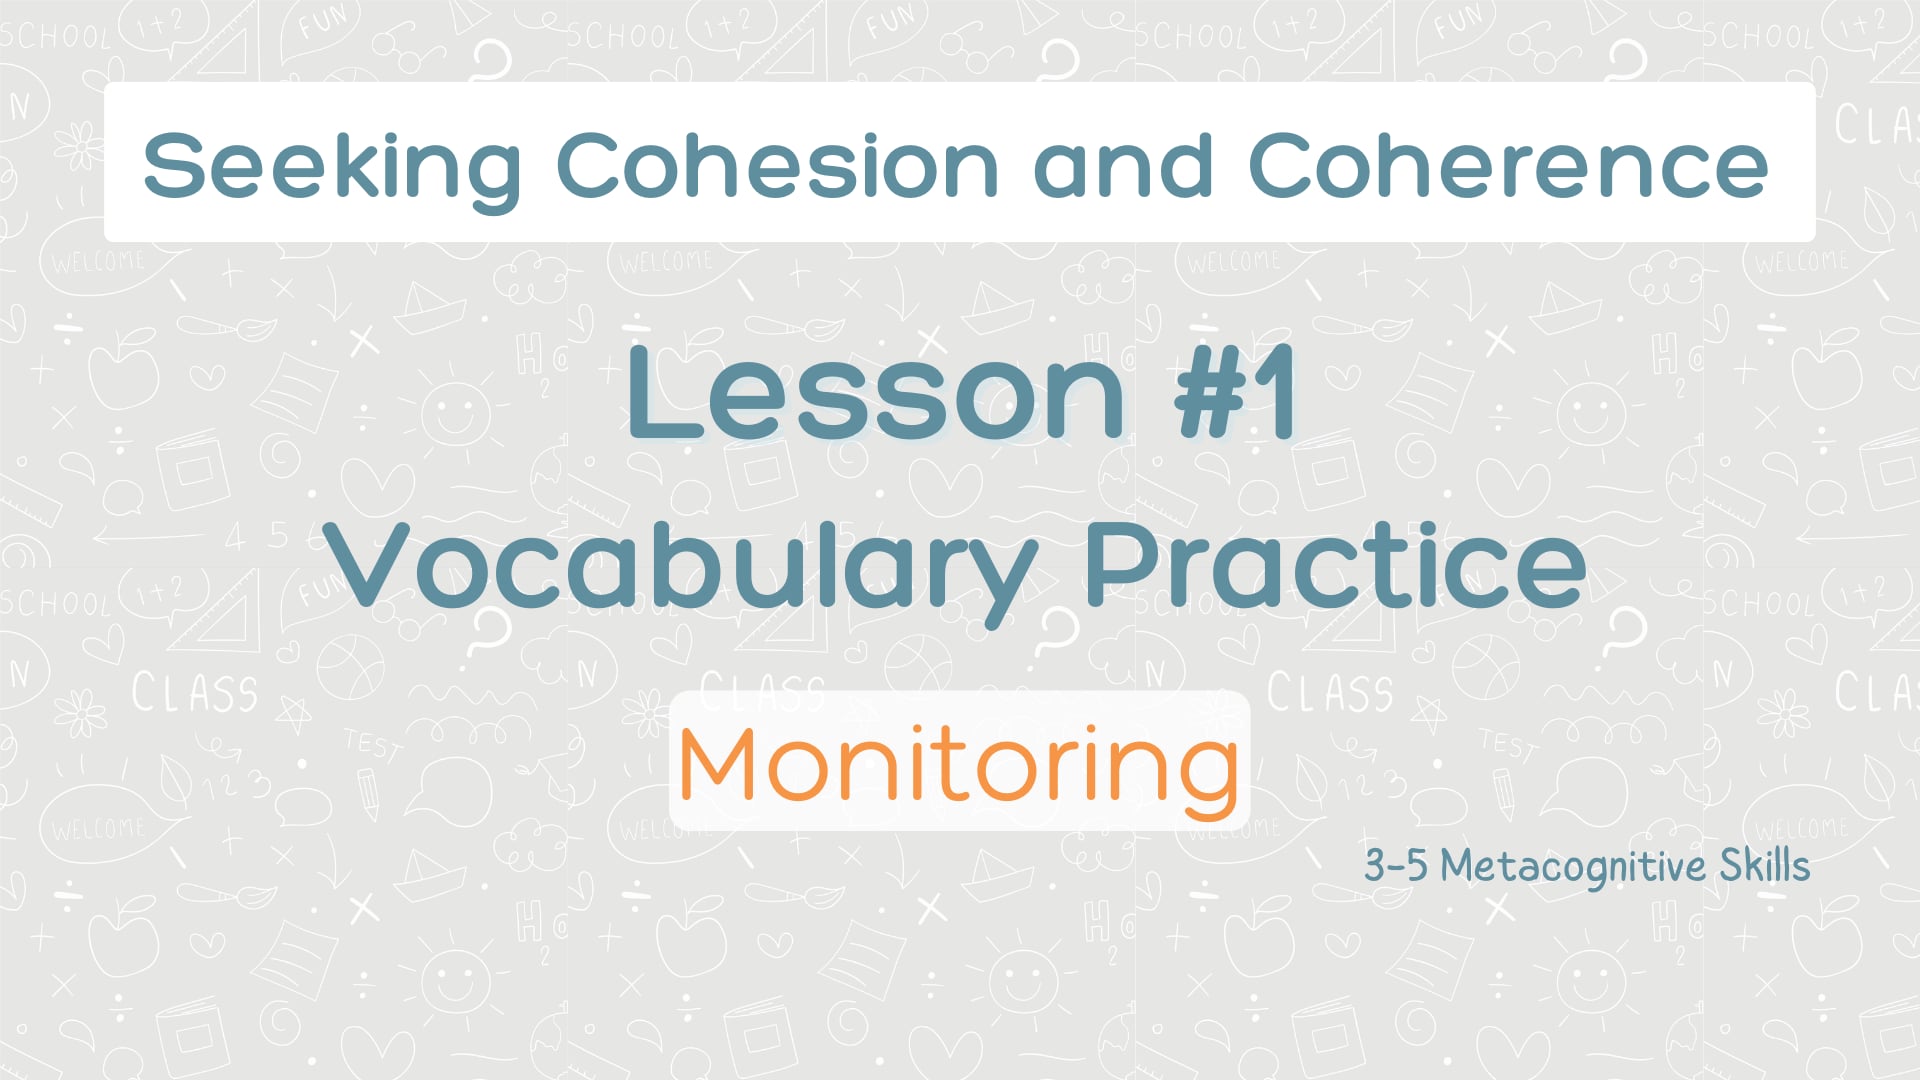 Lesson #1 Vocabulary Practice: Monitoring video thumbnail